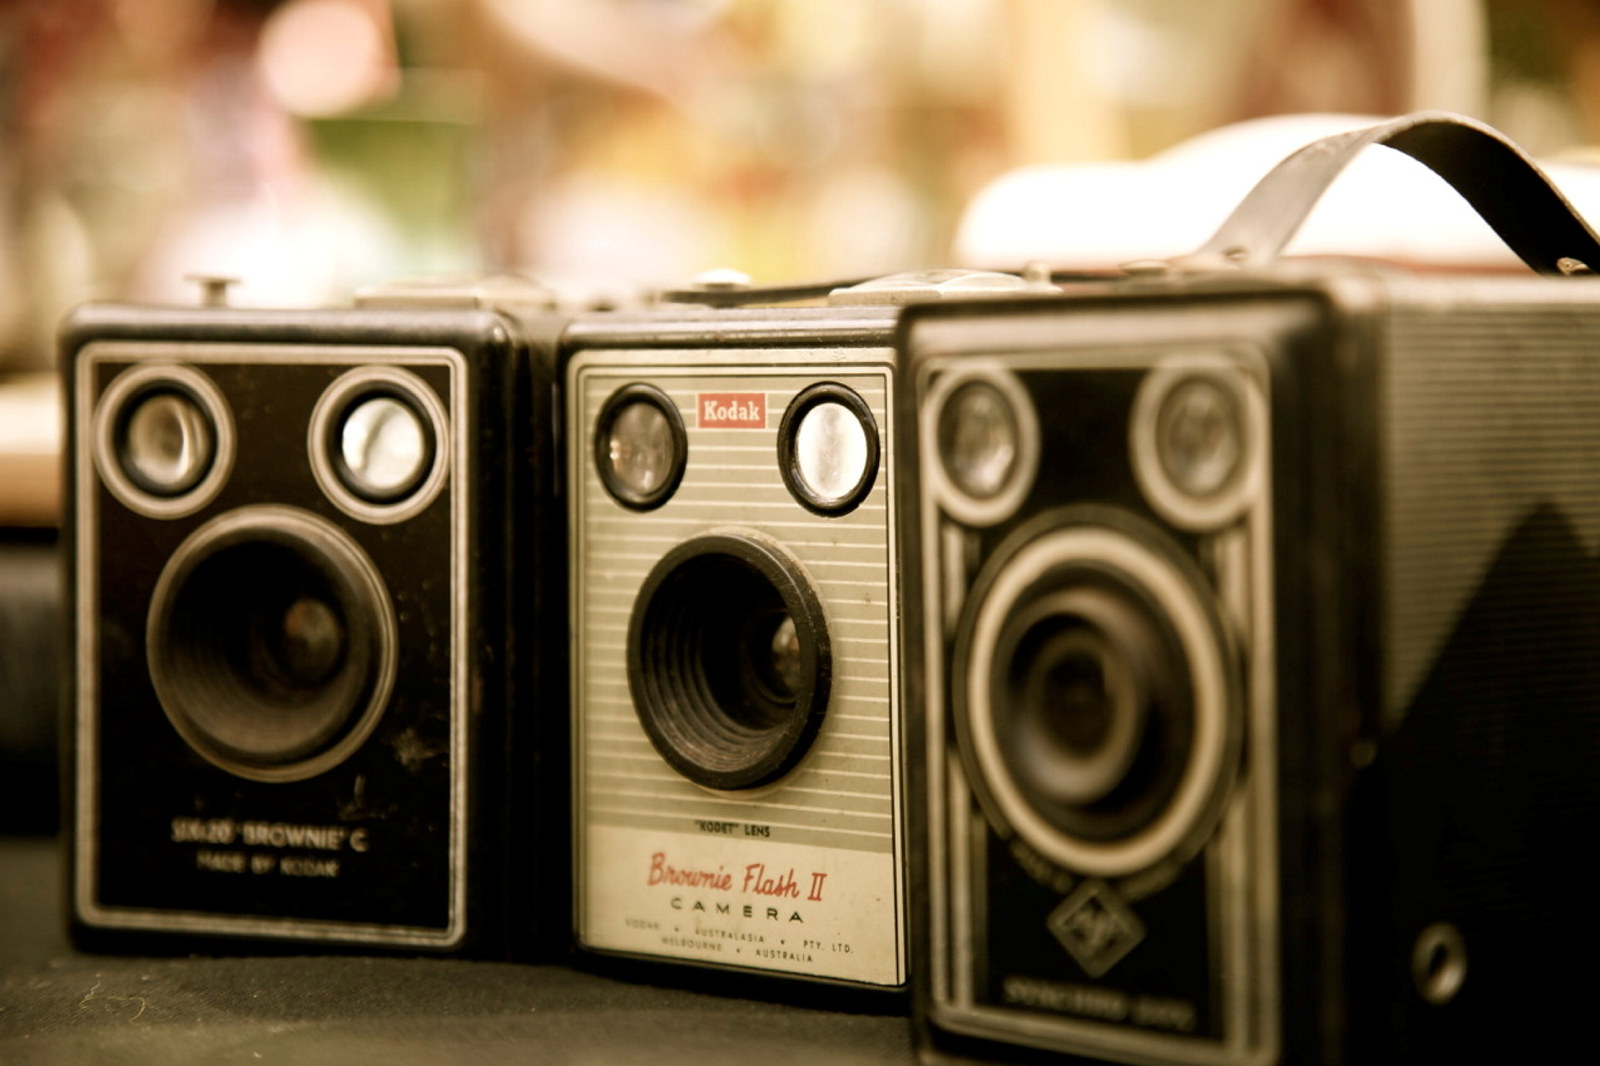 Vintage stereo at Fifties Fair 2011